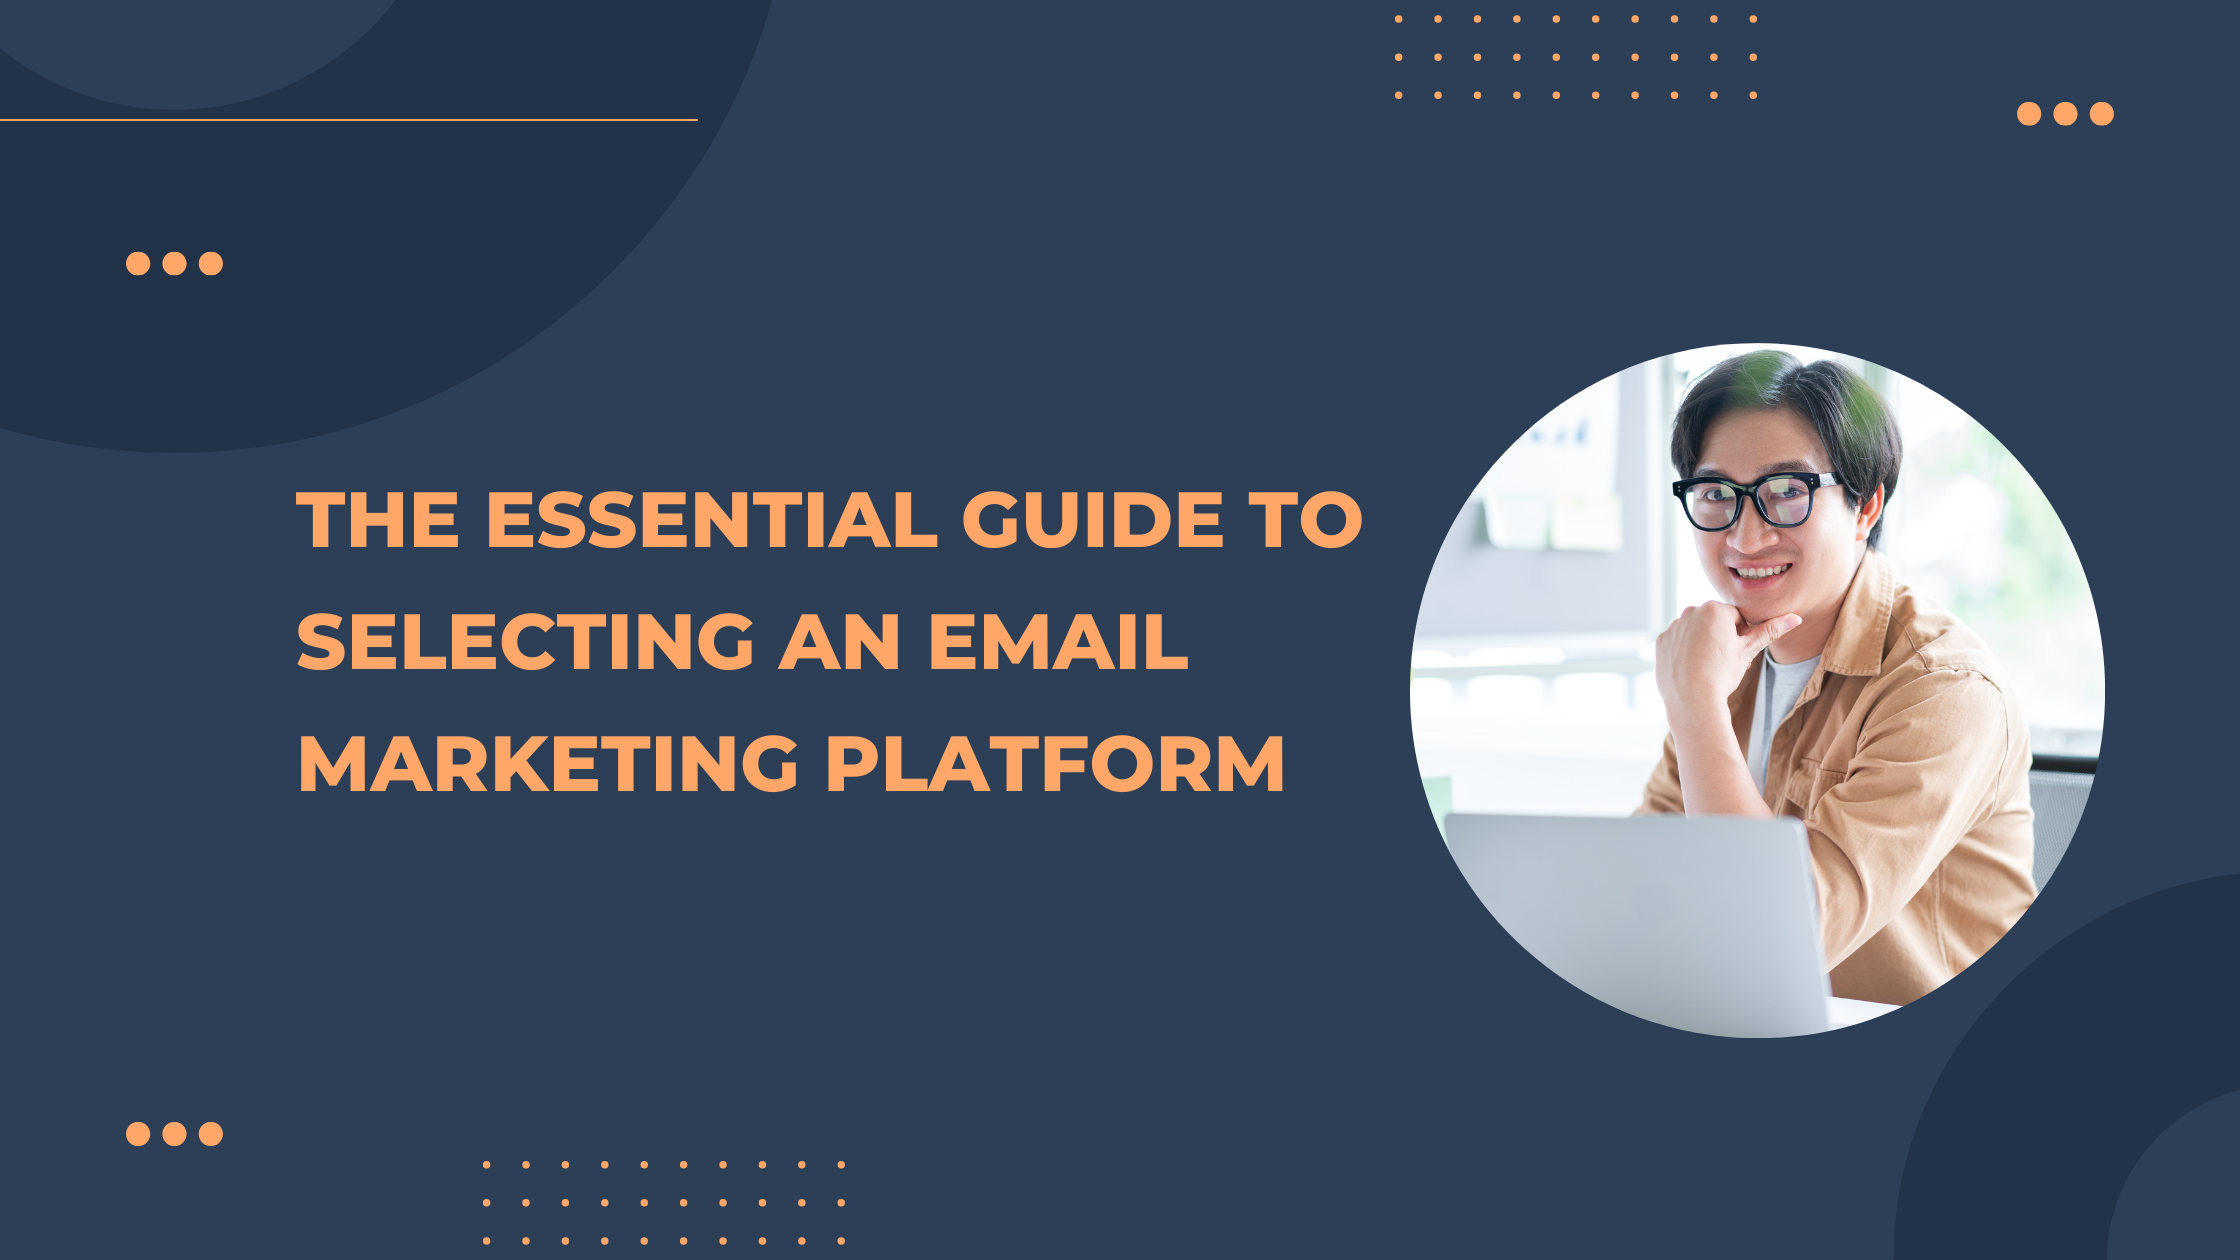 The Essential Guide to Selecting an Email Marketing Platform